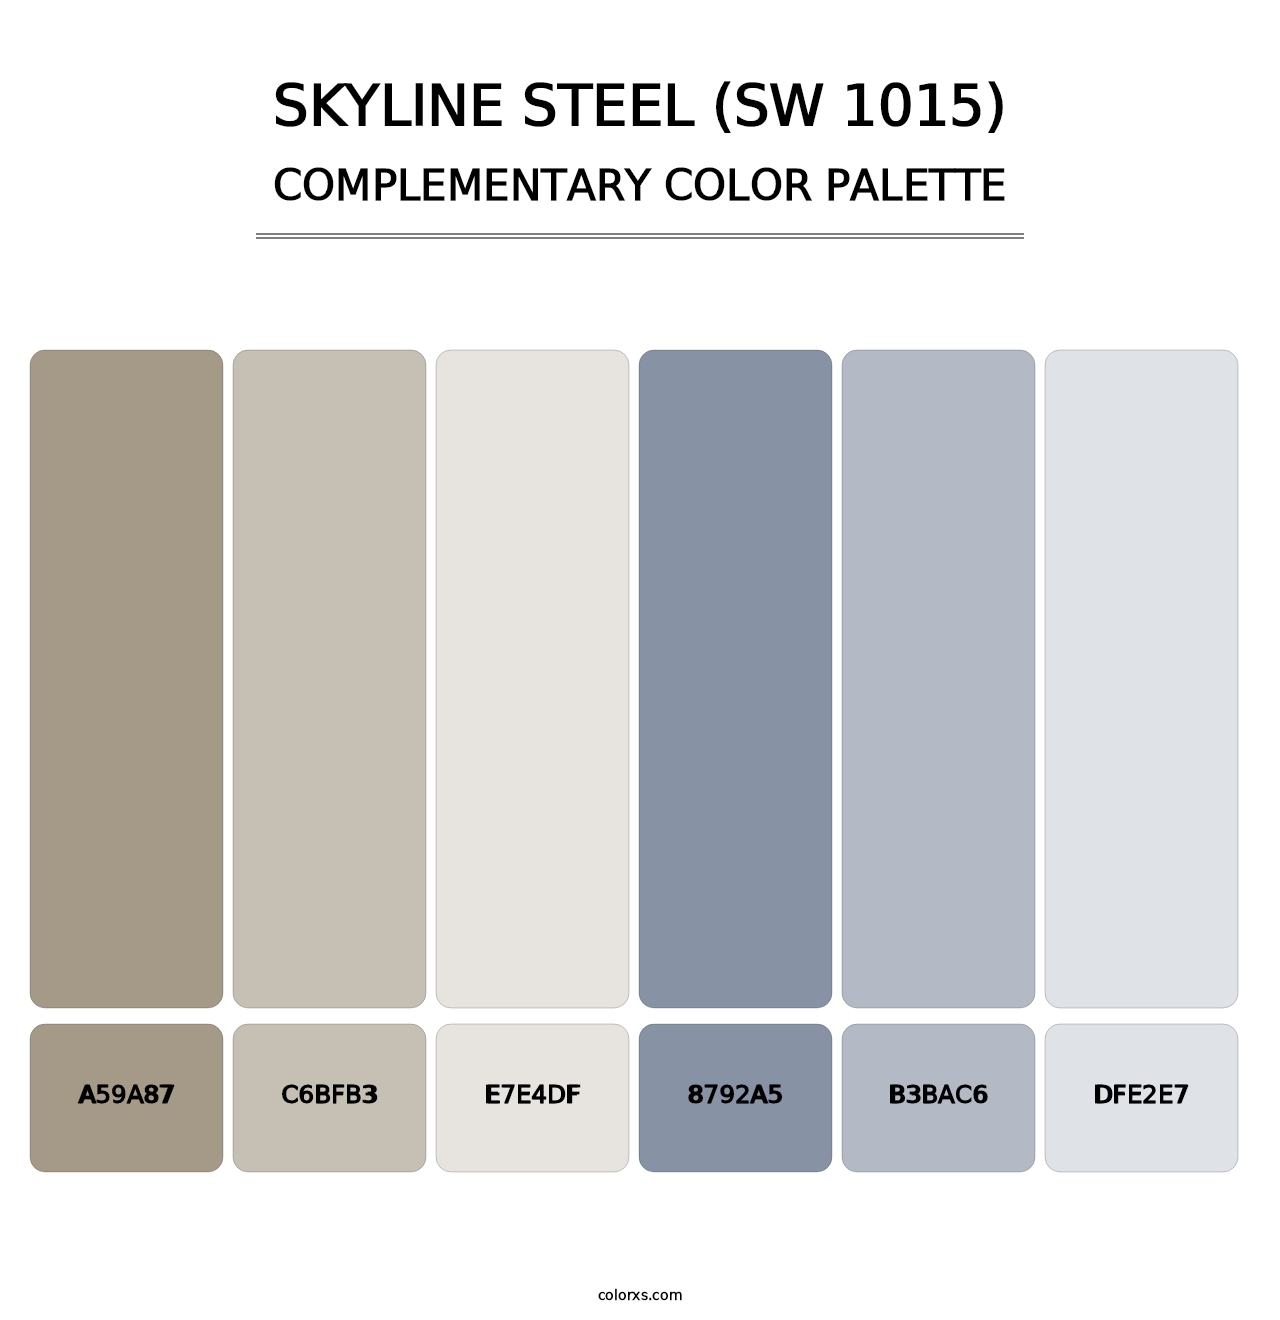 Skyline Steel (SW 1015) - Complementary Color Palette